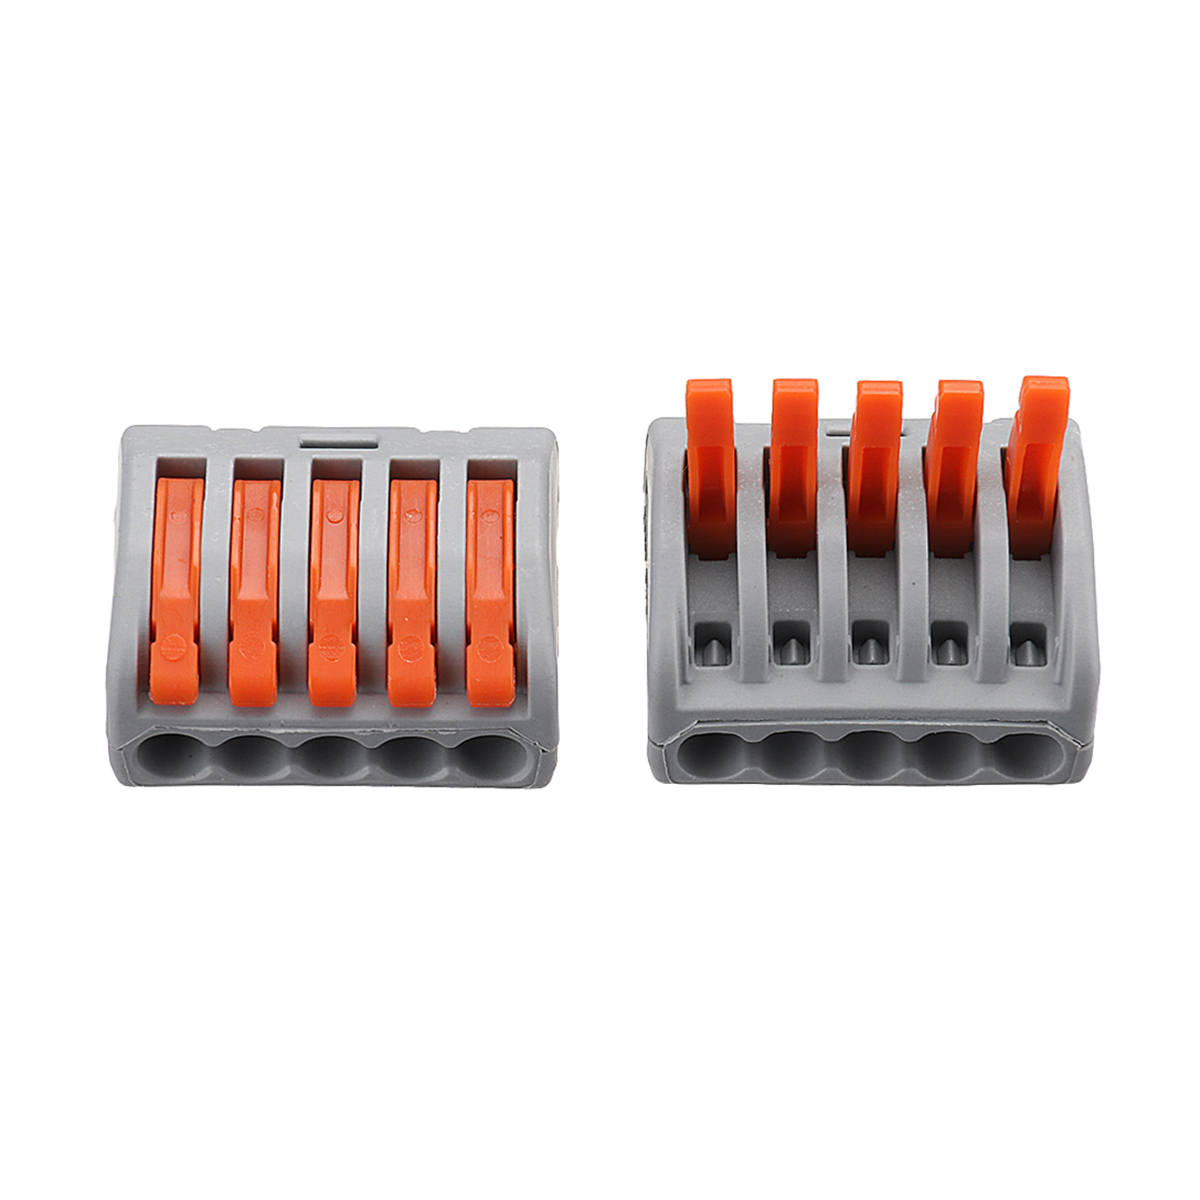 Excellwayreg-30Pcs-235-Holes-Spring-Conductor-Terminal-Block-Electric-Cable-Wire-Connector-1389031-6